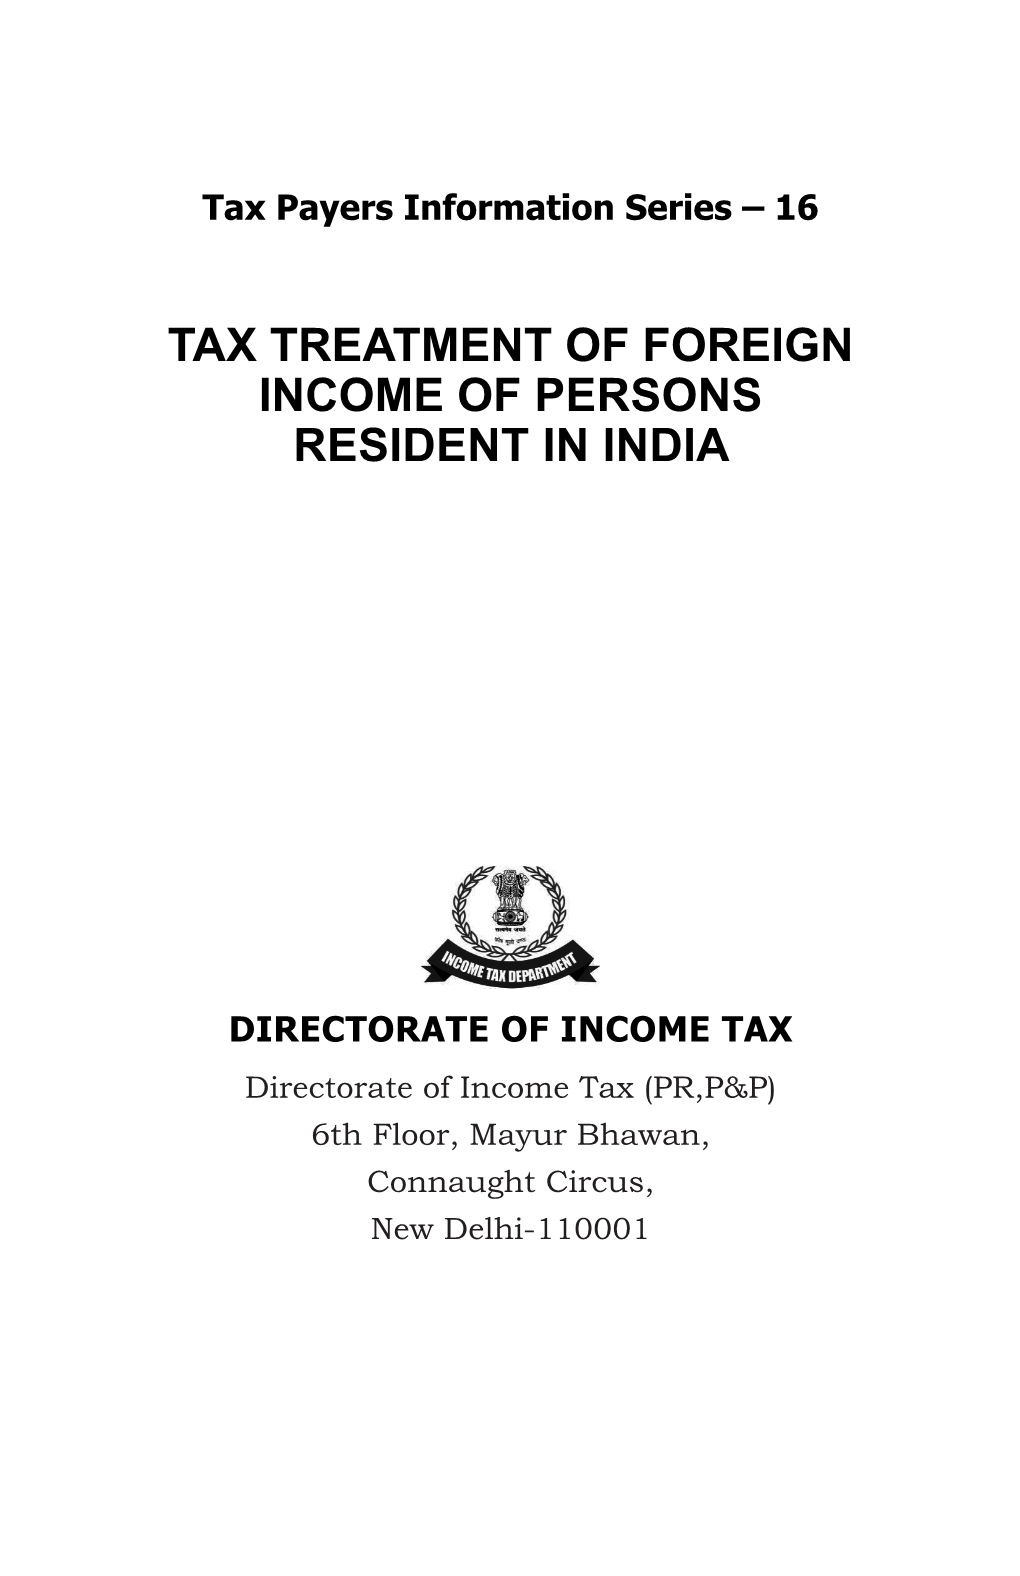 Tax Treatment of Foreign Income of Persons Resident in India